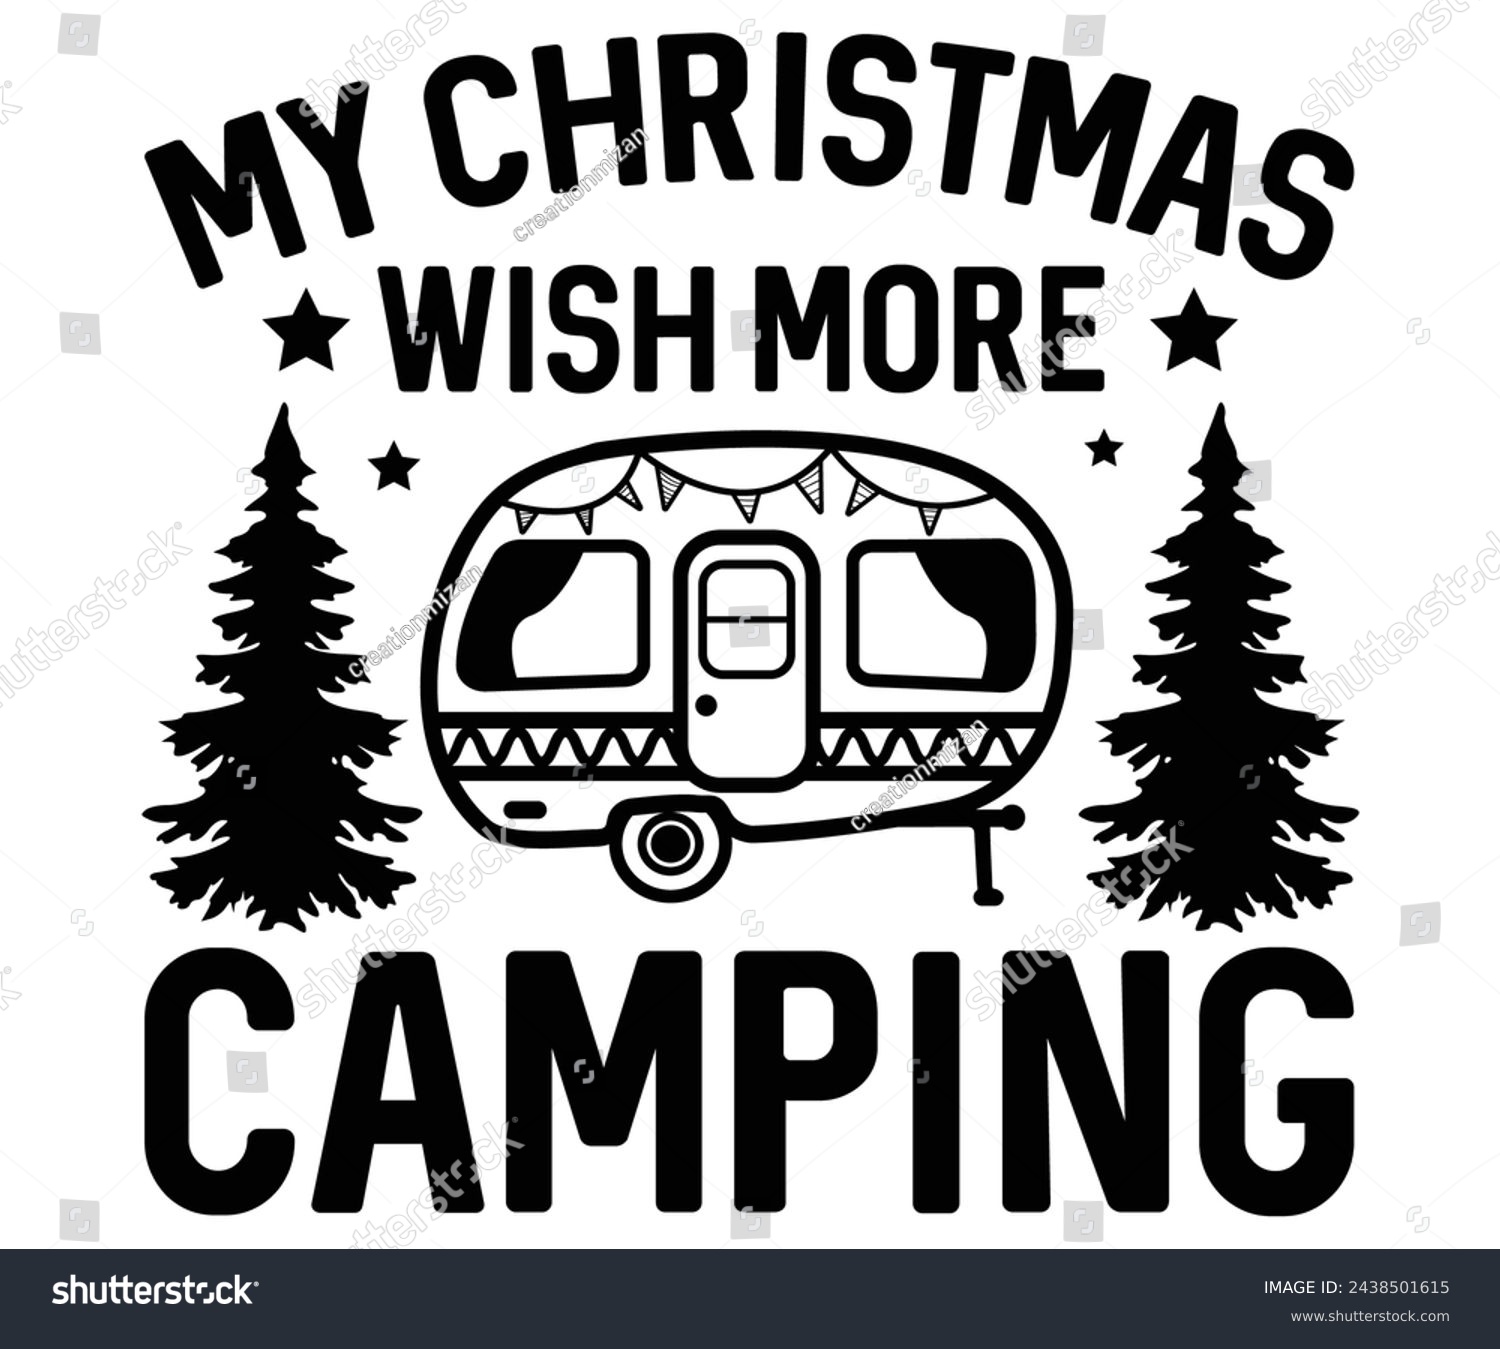 SVG of My Christmas Wish More Camping Svg,Camping Svg,Hiking,Funny Camping,Adventure,Summer Camp,Happy Camper,Camp Life,Camp Saying,Camping Shirt svg